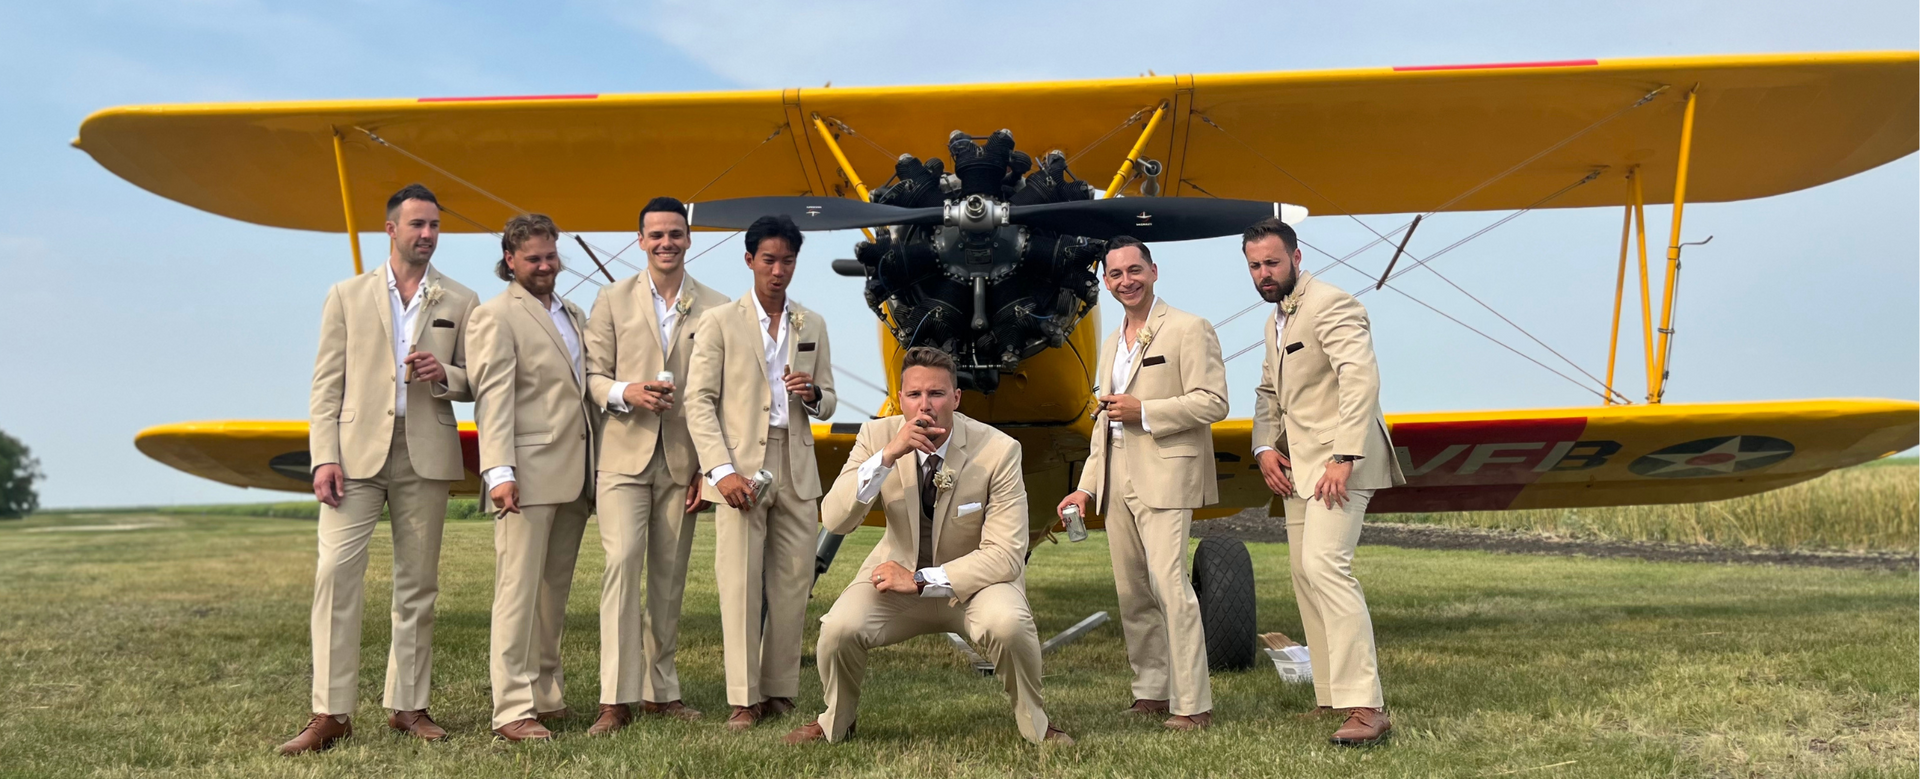 Justin Craddock looking cool with his groomsmen at his farm wedding in front of an airplane in Fannystelle Manitoba